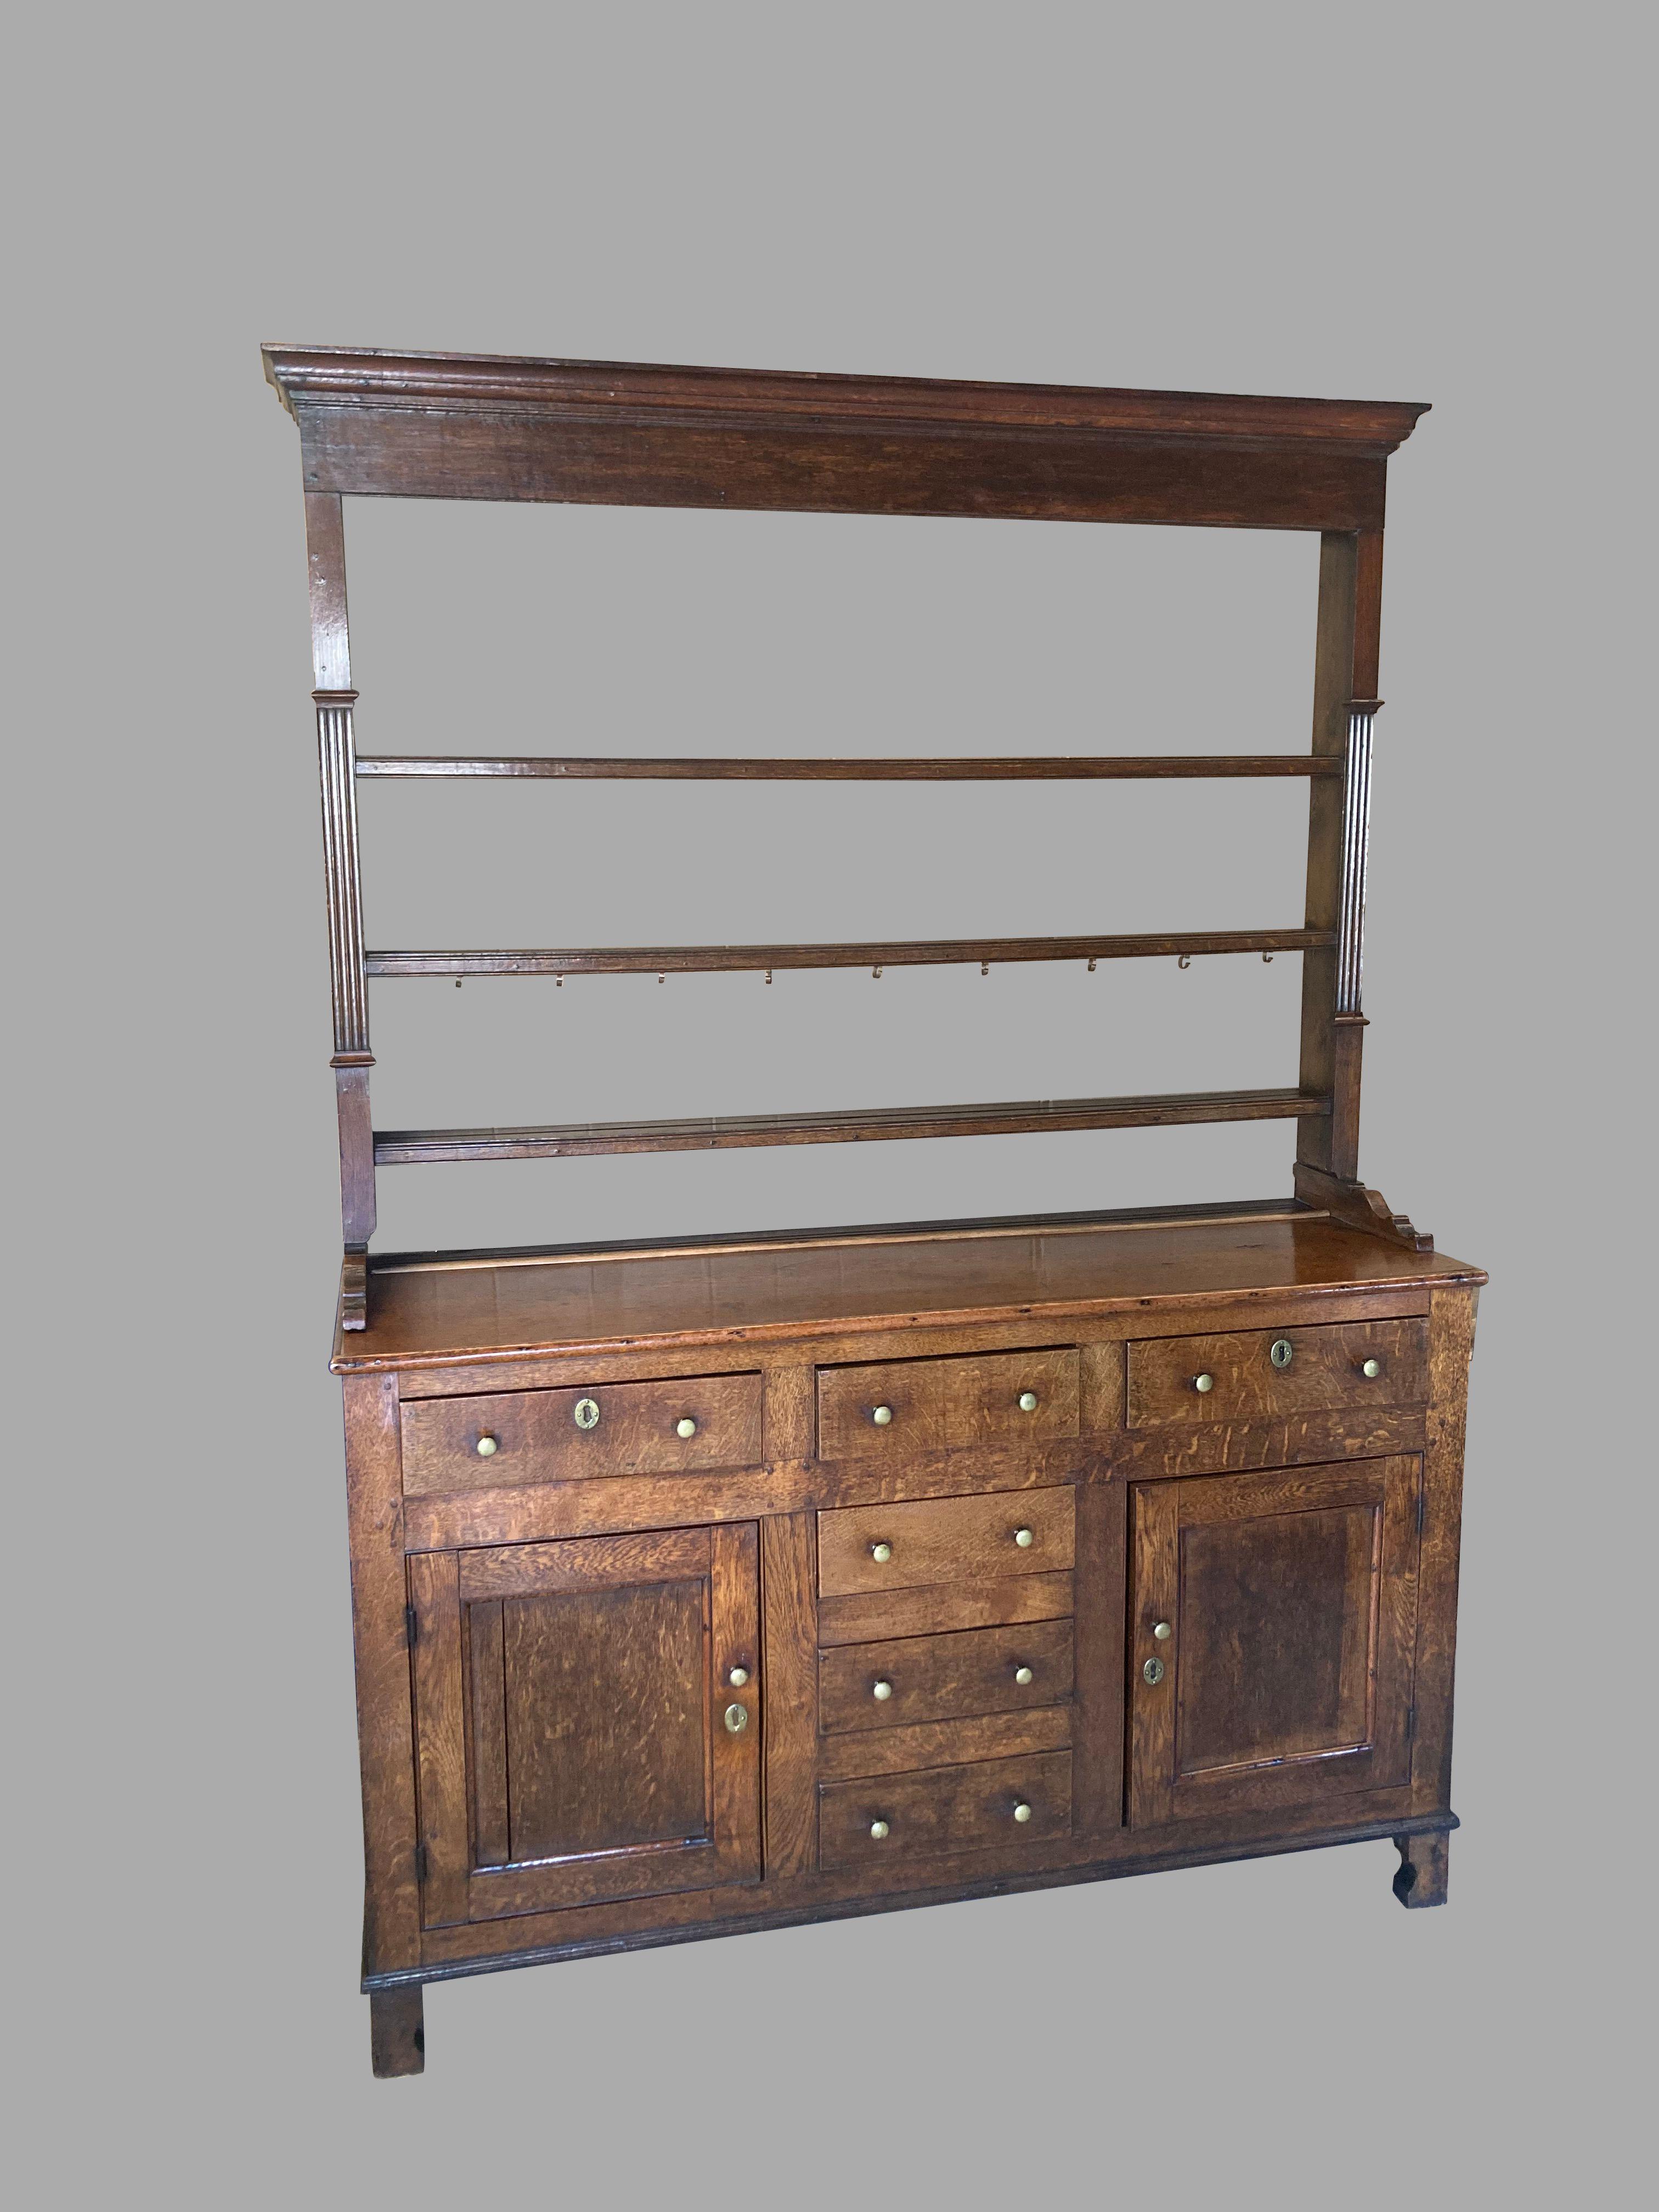 A good English solid oak high dresser, often called a Welsh dresser, in 2 parts, the upper stage with an open back, the 3 shelves mortised into the sides, retaining some hooks for cups. The sides are reeded and terminate in a well-designed scalloped